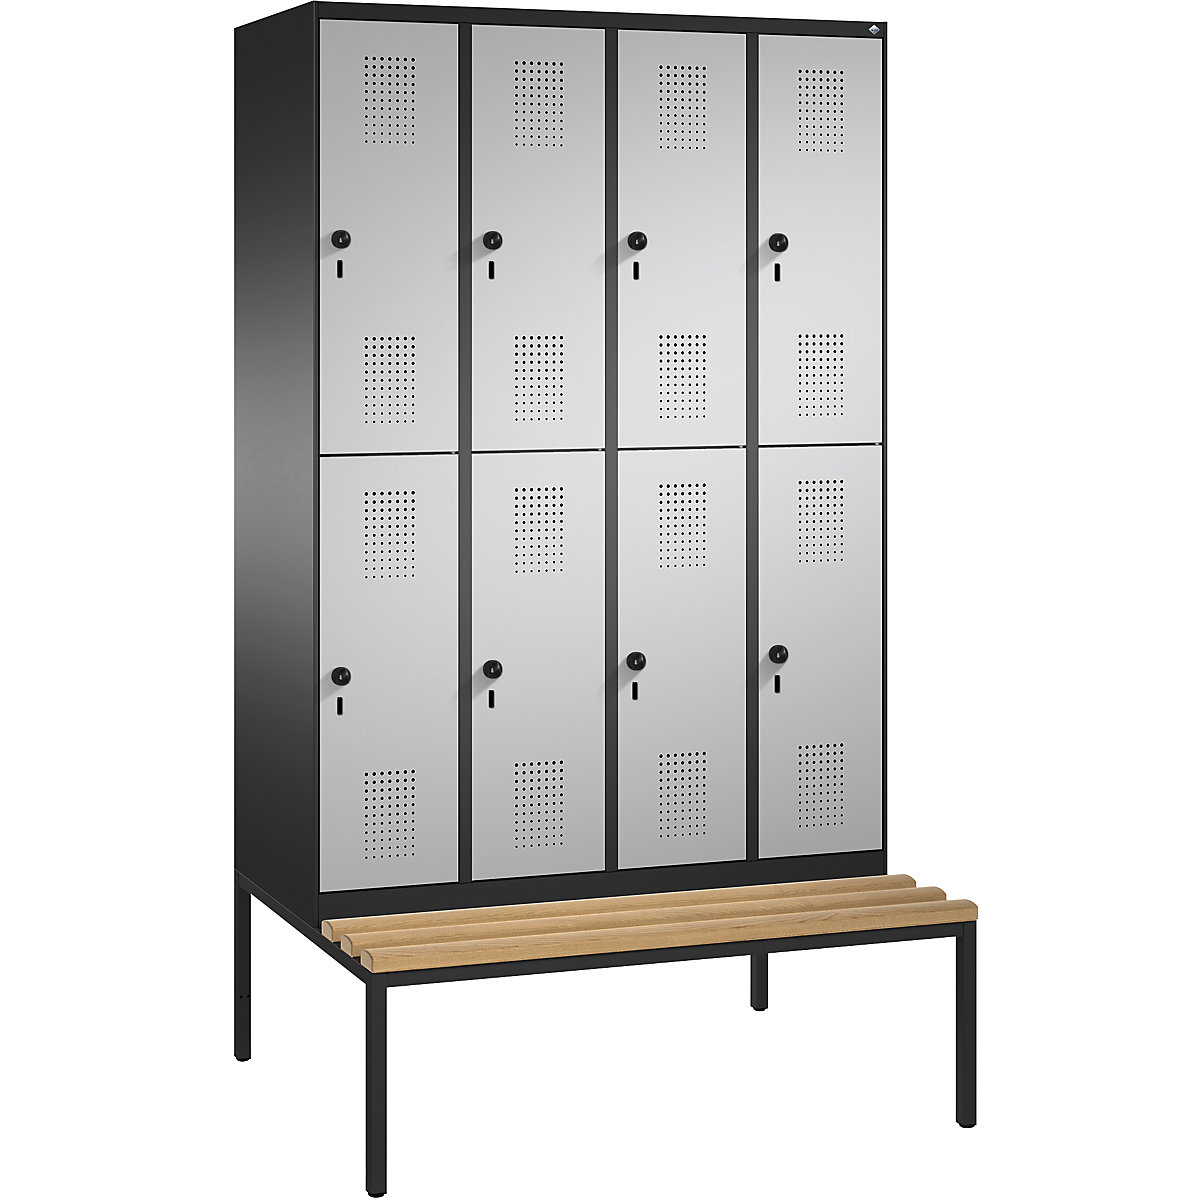 EVOLO cloakroom locker, double tier, with bench – C+P, 4 compartments, 2 shelf compartments each, compartment width 300 mm, black grey / white aluminium-16